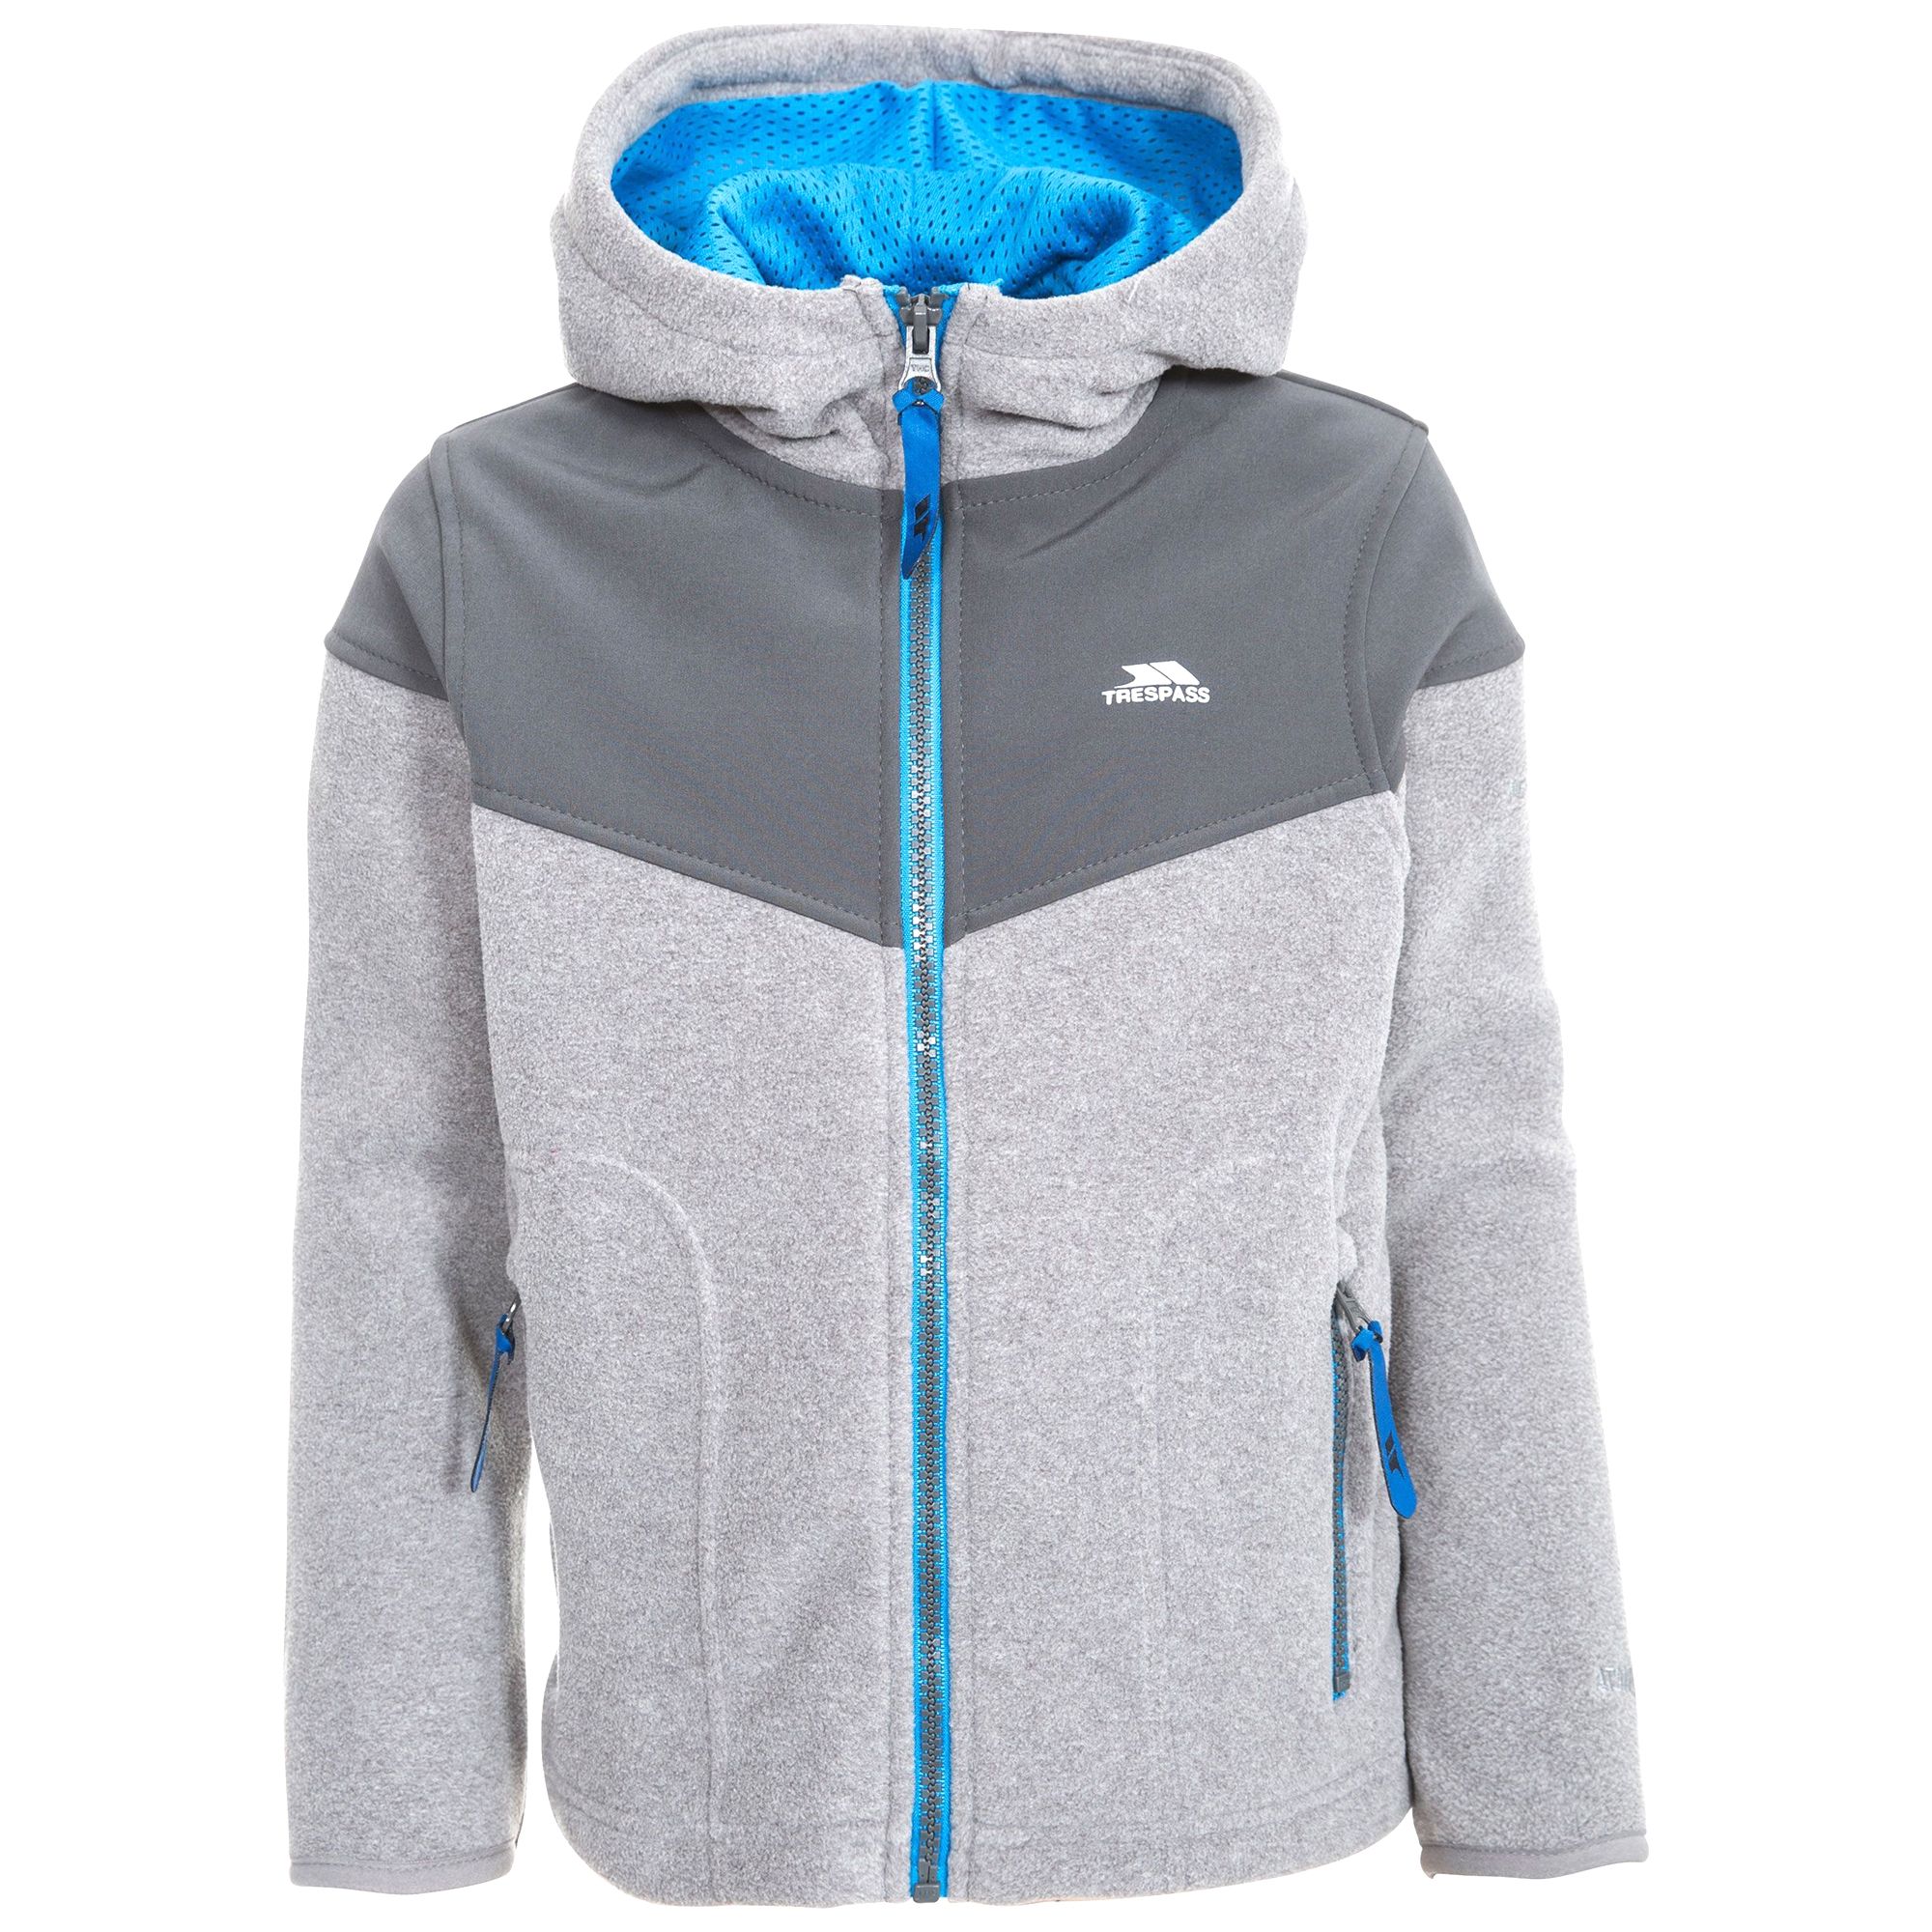 Boys fleece jacket with grown on hood. Contrast softshell panels. 2 x zip pockets. Contrast centre front and pocket zips. Contrast mesh hood lining. Binding at cuffs. Ideal for wearing outside on a cold day. Main: 100% Polyester. Contrast: 95% Polyester, 5% Elastane. Lining: 100% Polyester Mesh.